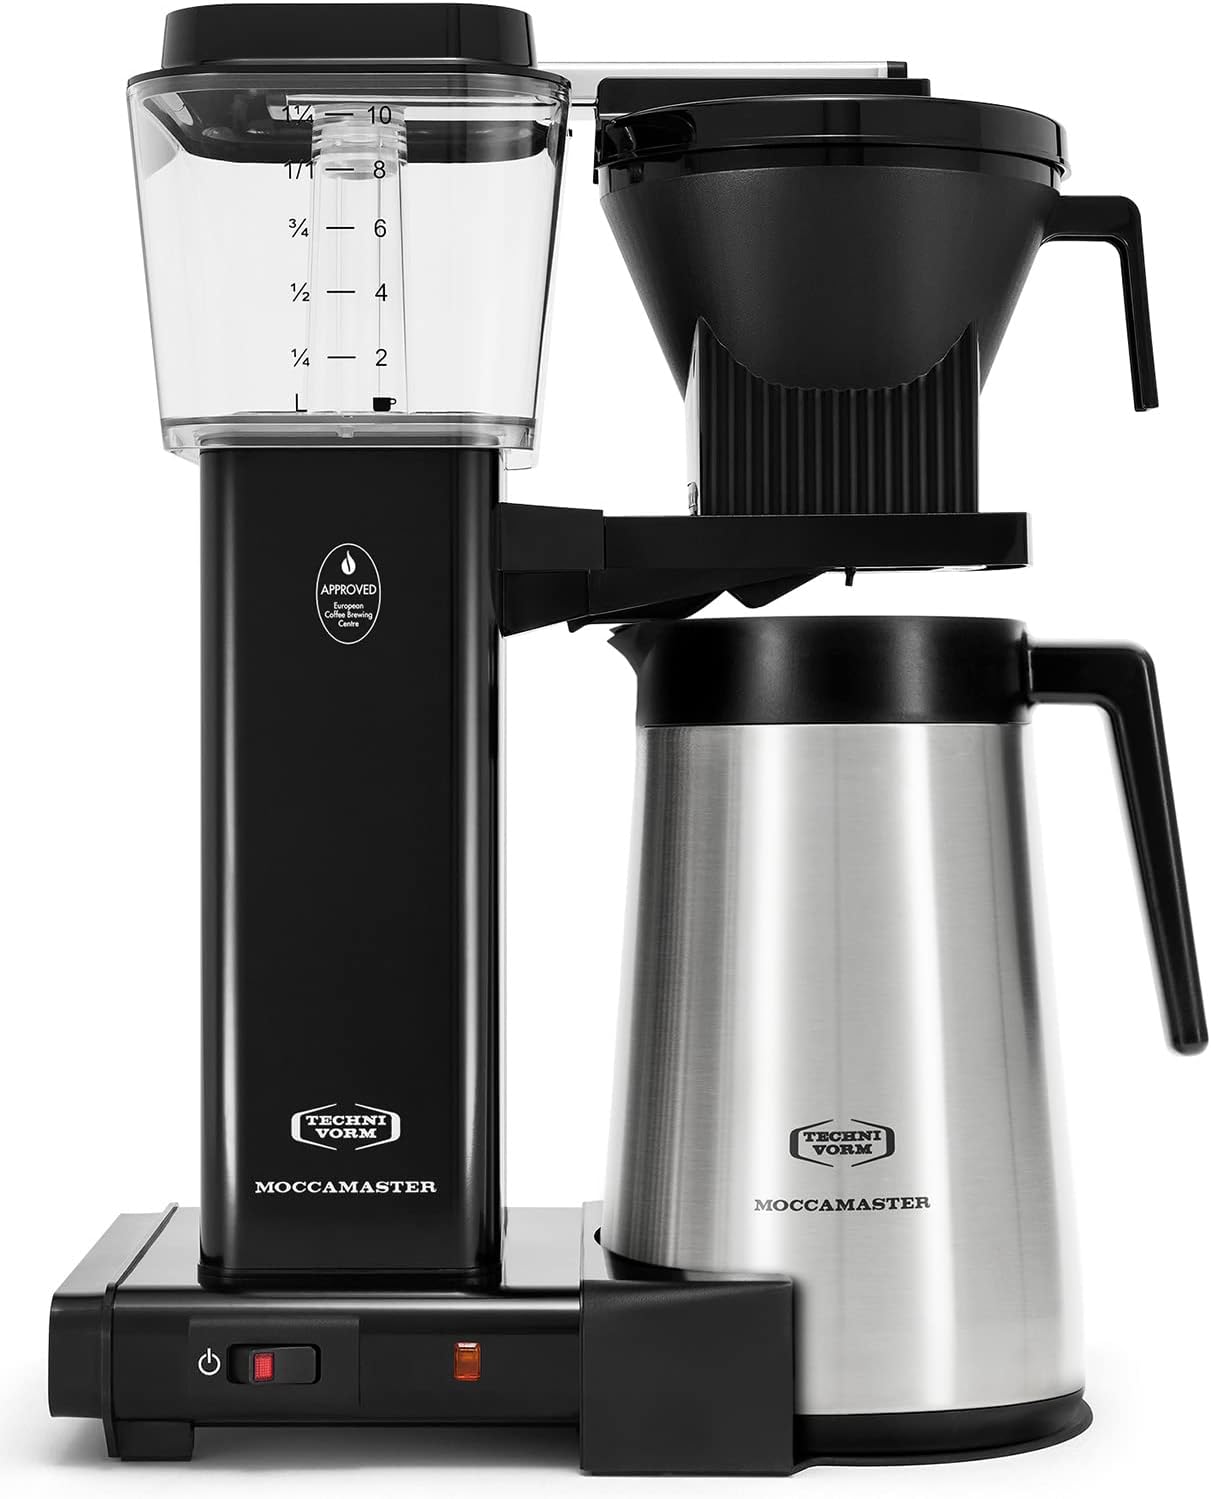 Technivorm Moccamaster 79312 KBGT Coffee Brewer Review